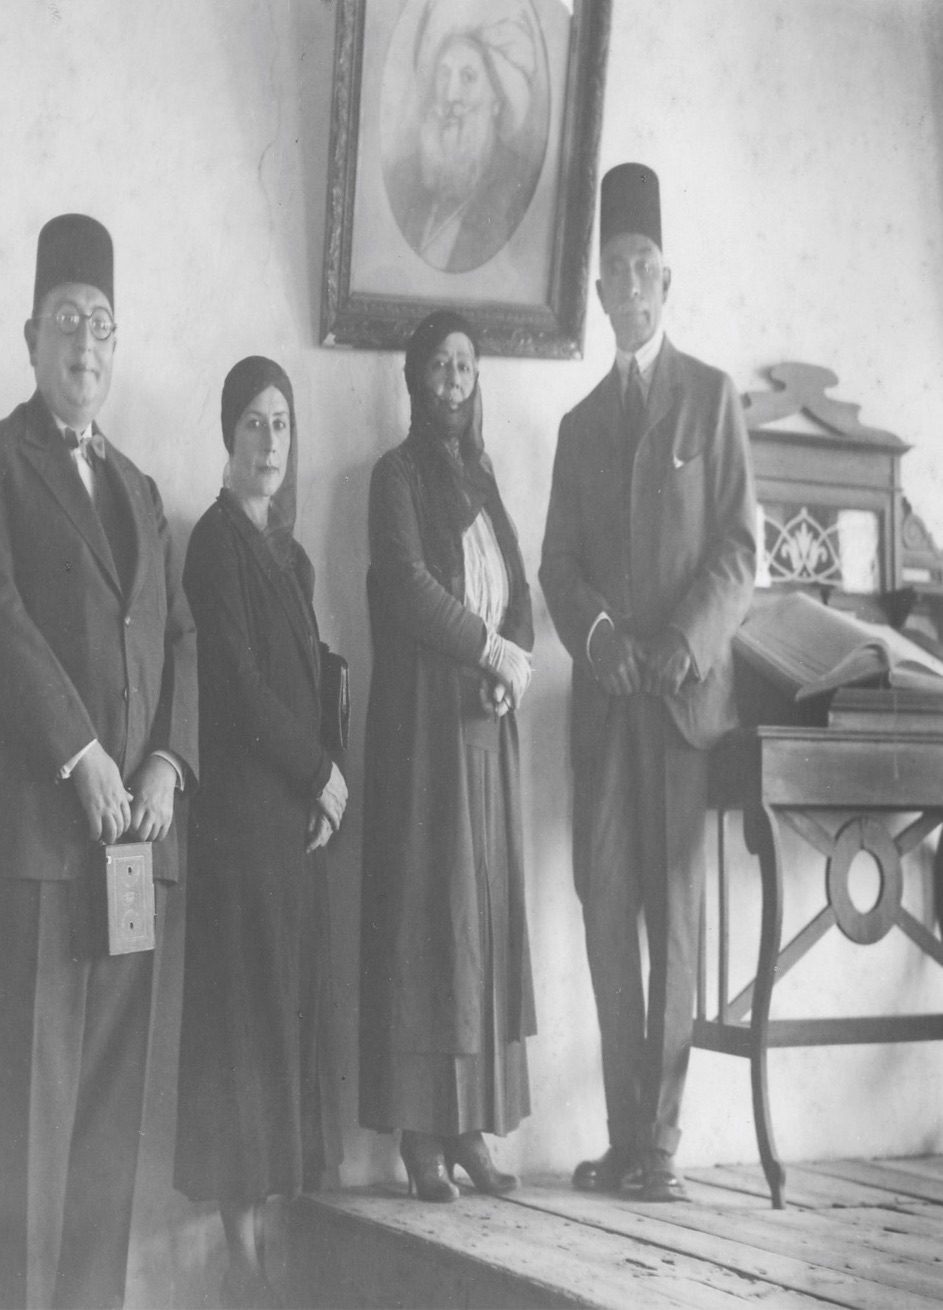 Members of the Egyptian royal family inside the House of Mohammed Ali, Kavala, 1932. ELIA Archive